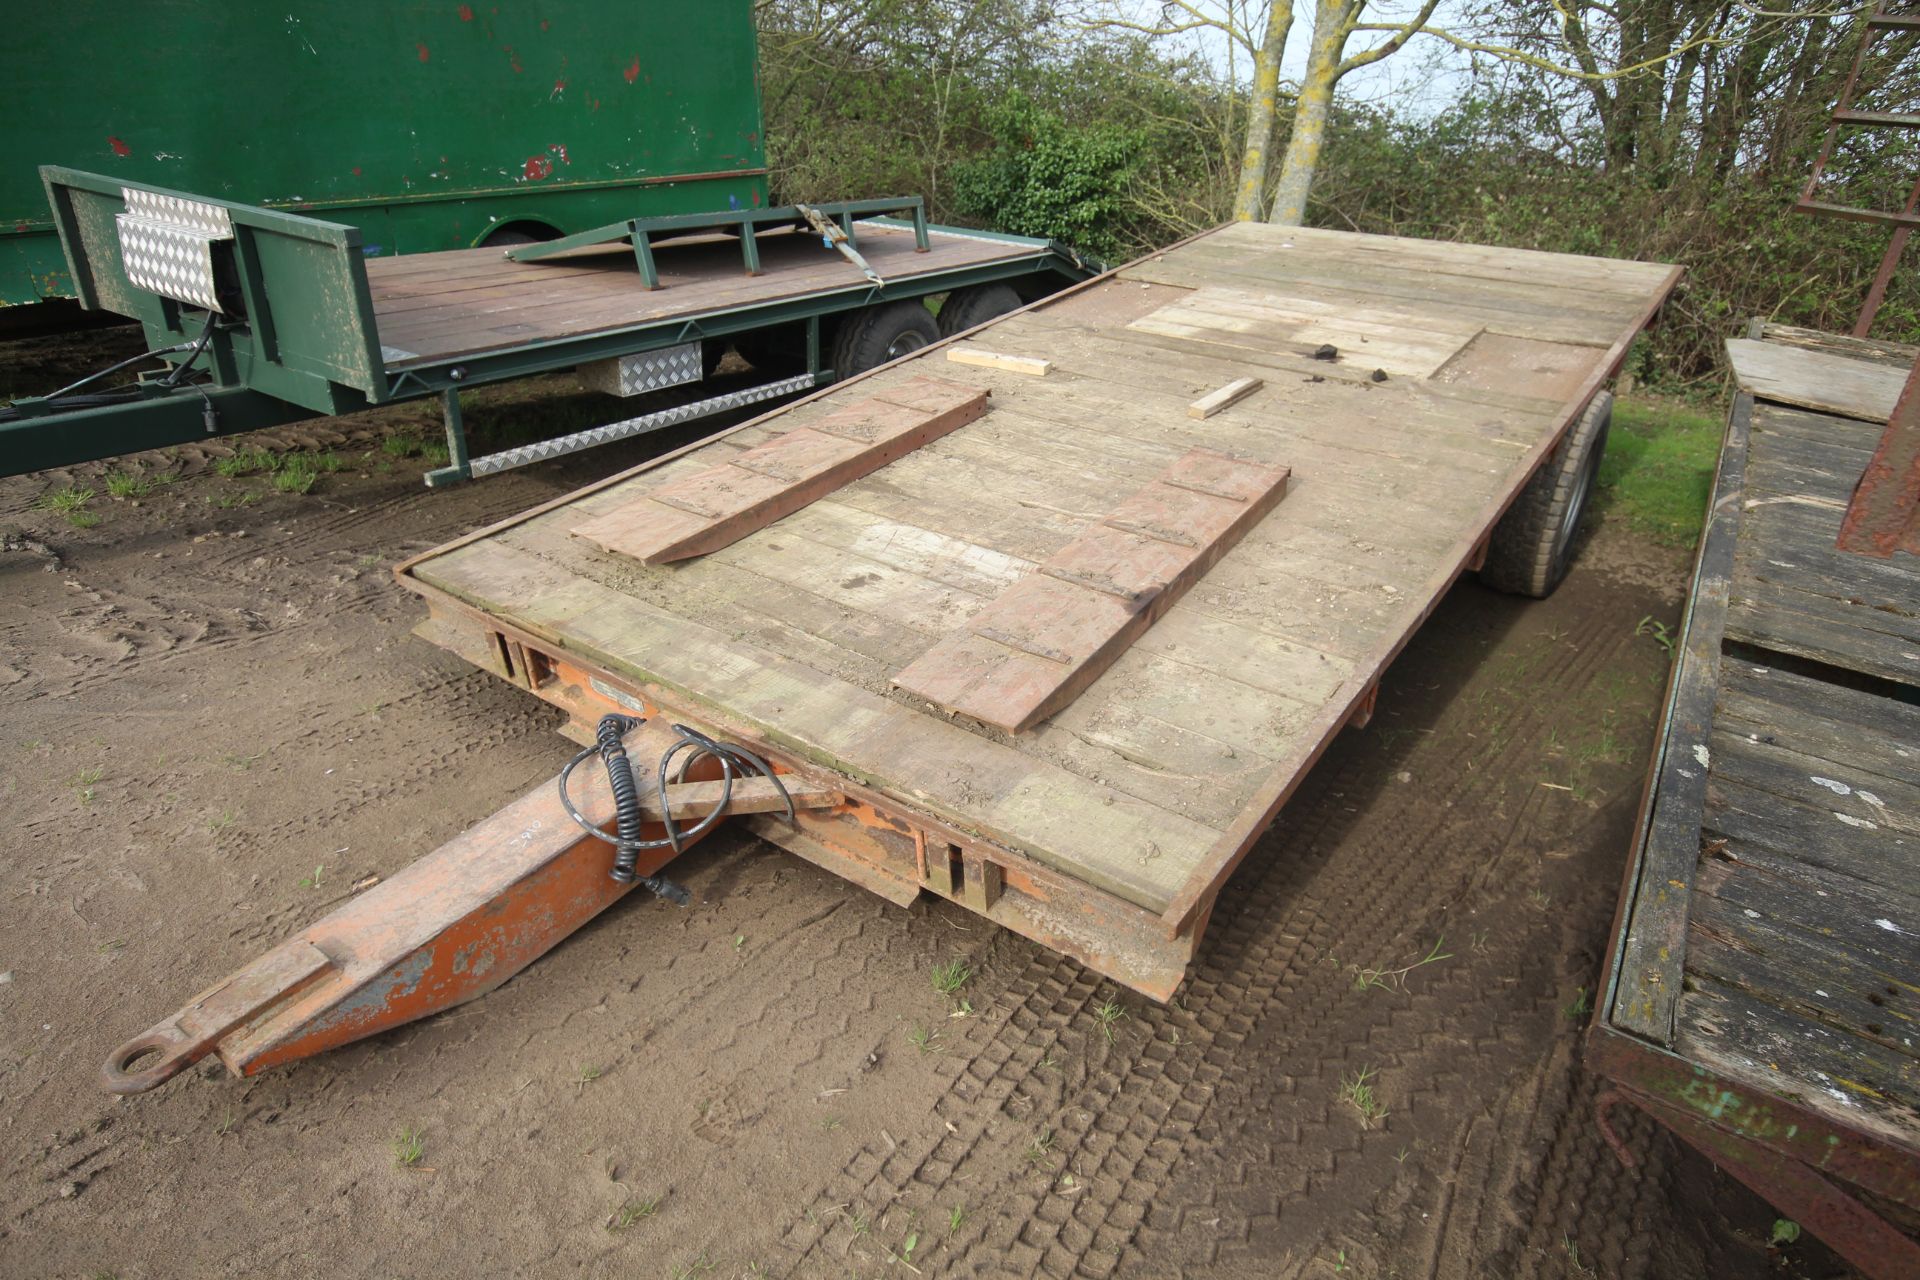 Brian Legg 8T single axle low loader. With lights, hydraulic brakes and ramps.